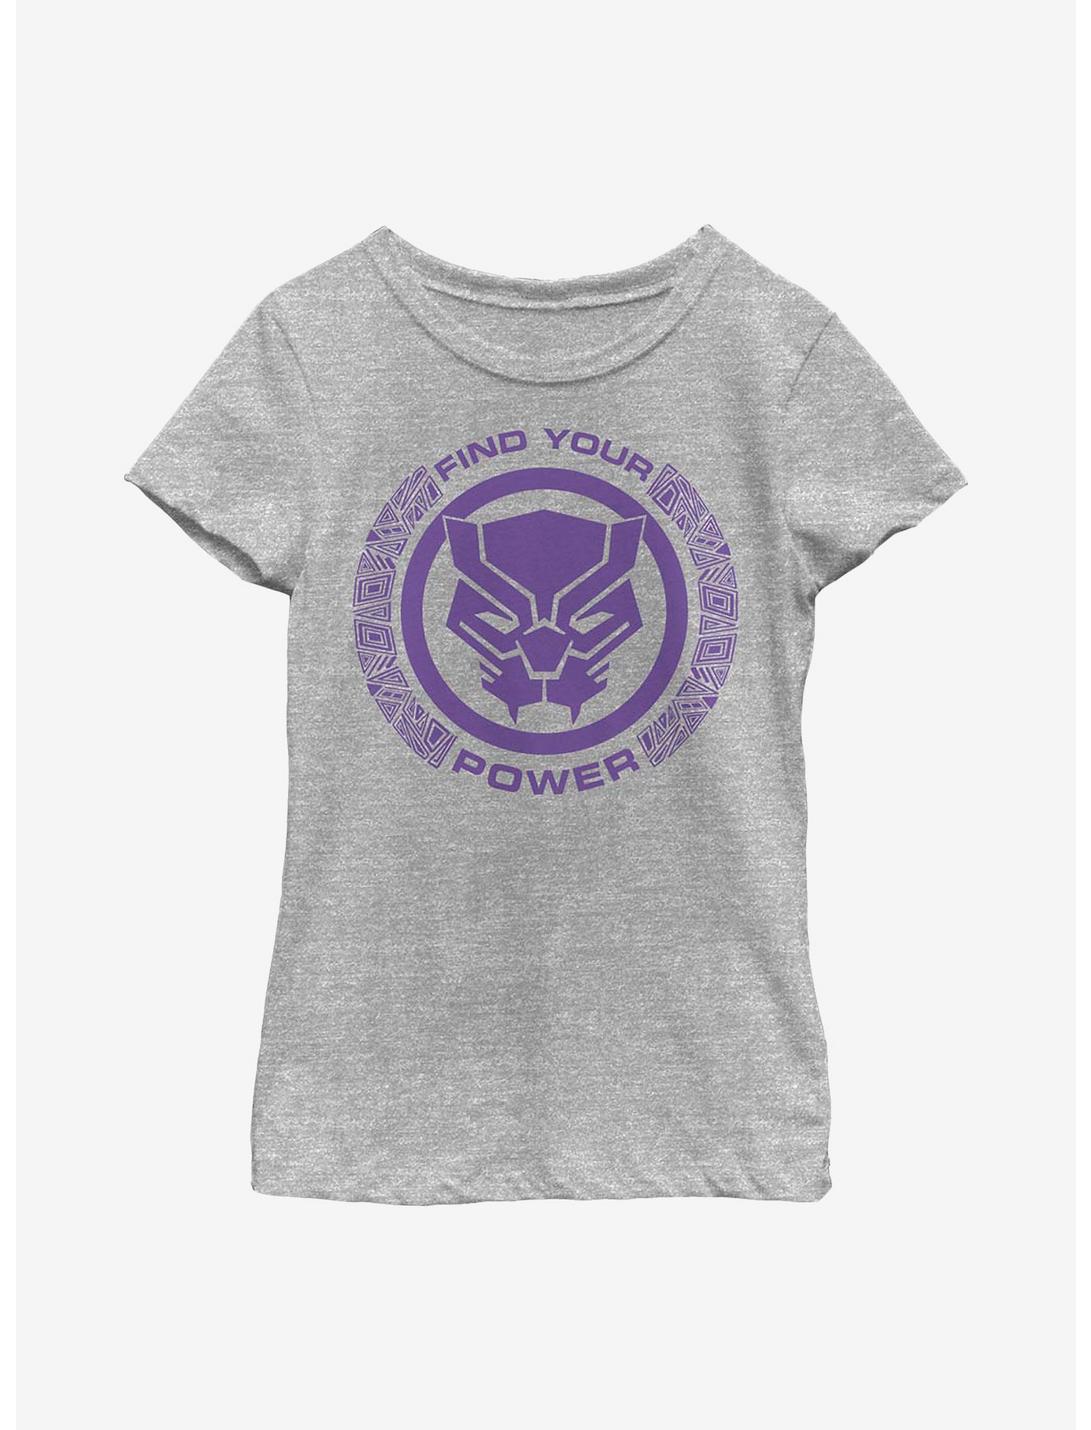 Marvel Black Panther Power Youth Girls T-Shirt, ATH HTR, hi-res